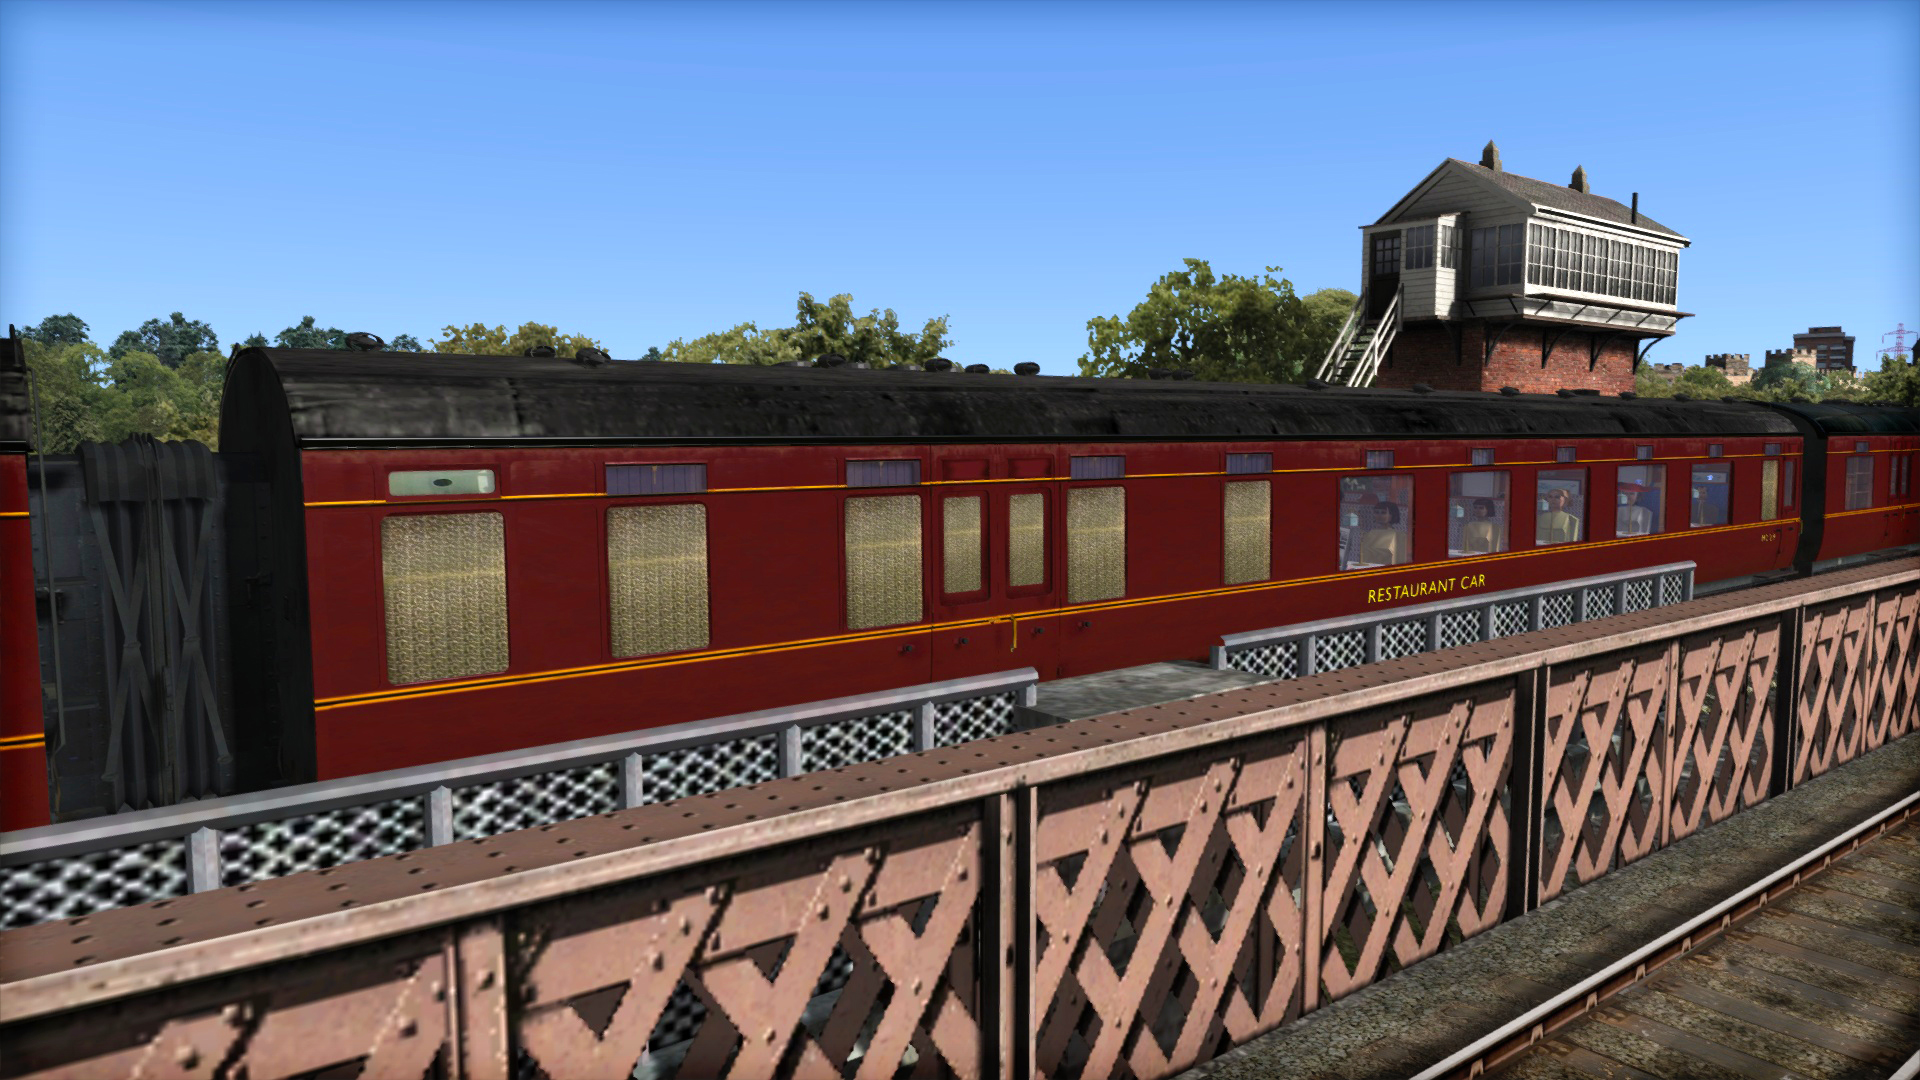 TS Marketplace: LMS P1&P2 BR Maroon Coach Pack Add-On screenshot